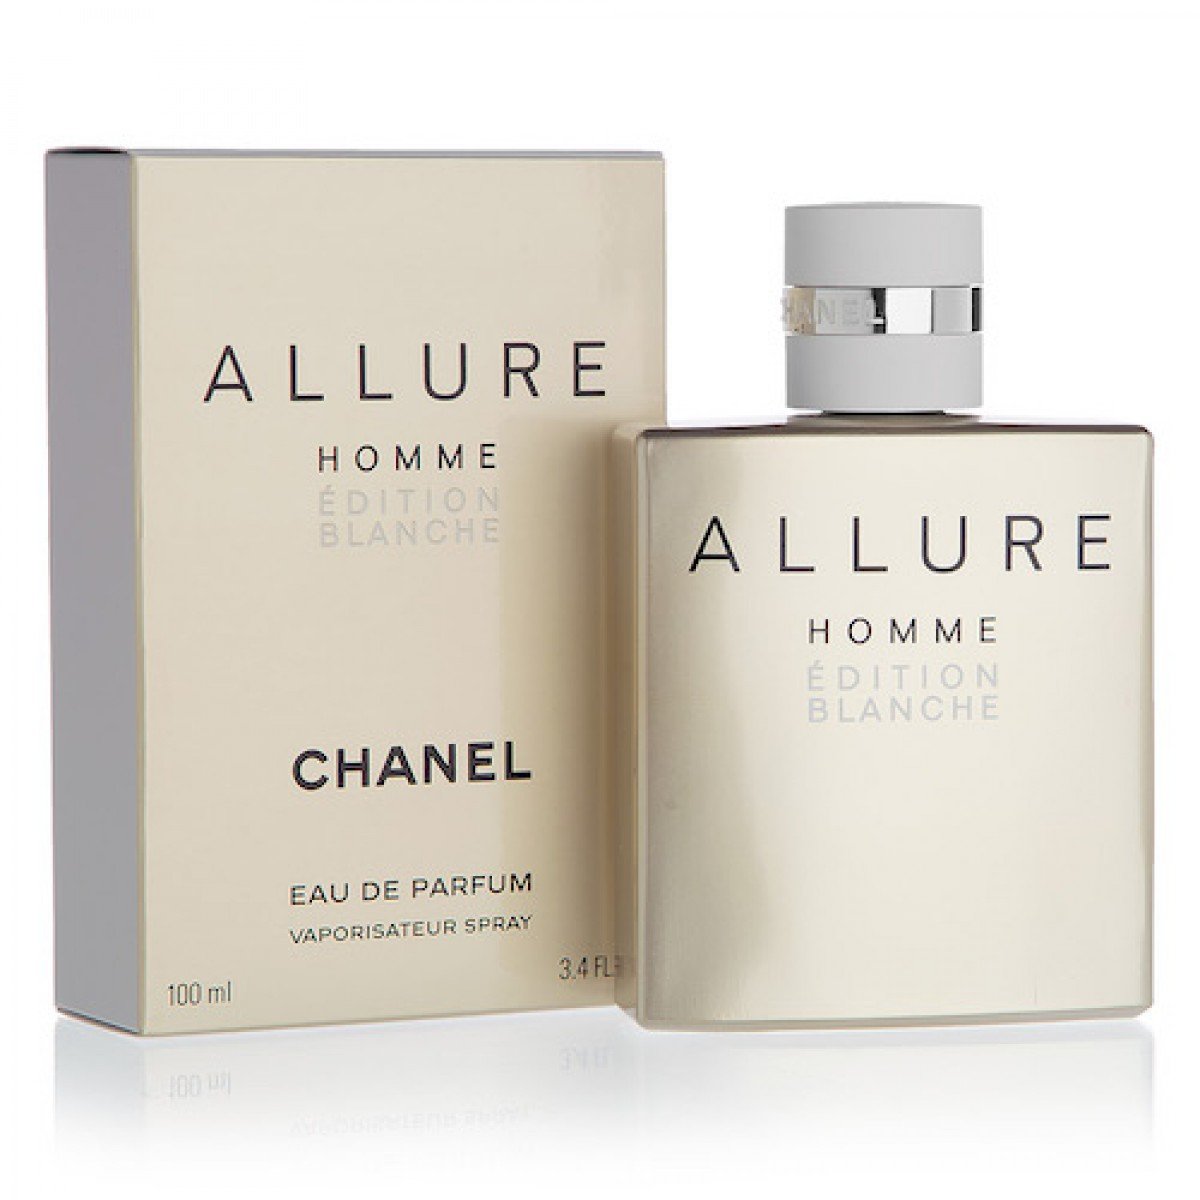 Туалетная вода chanel homme. Chanel Allure homme Edition Blanche 100ml. Chanel Allure homme Edition Edition. Chanel Allure homme 100 ml. Chanel Allure homme Edition Blanche Eau de Parfum.